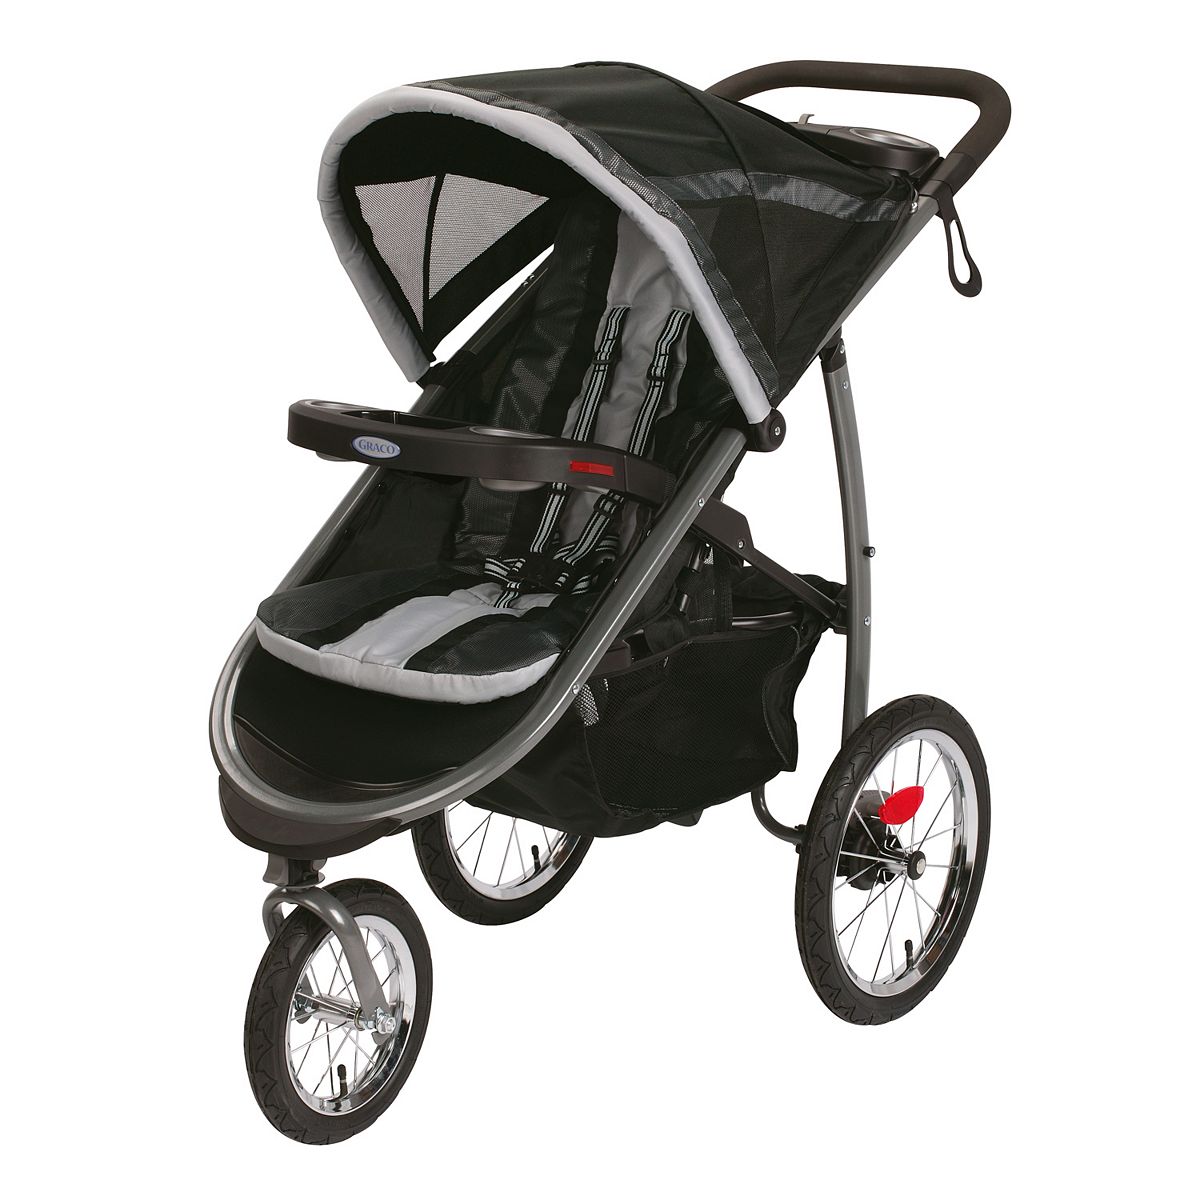 This jogging stroller is very portable with FastAction quick fold. It also has padded, adjustable 3- or 5- point harness adjusts for children as they grow.